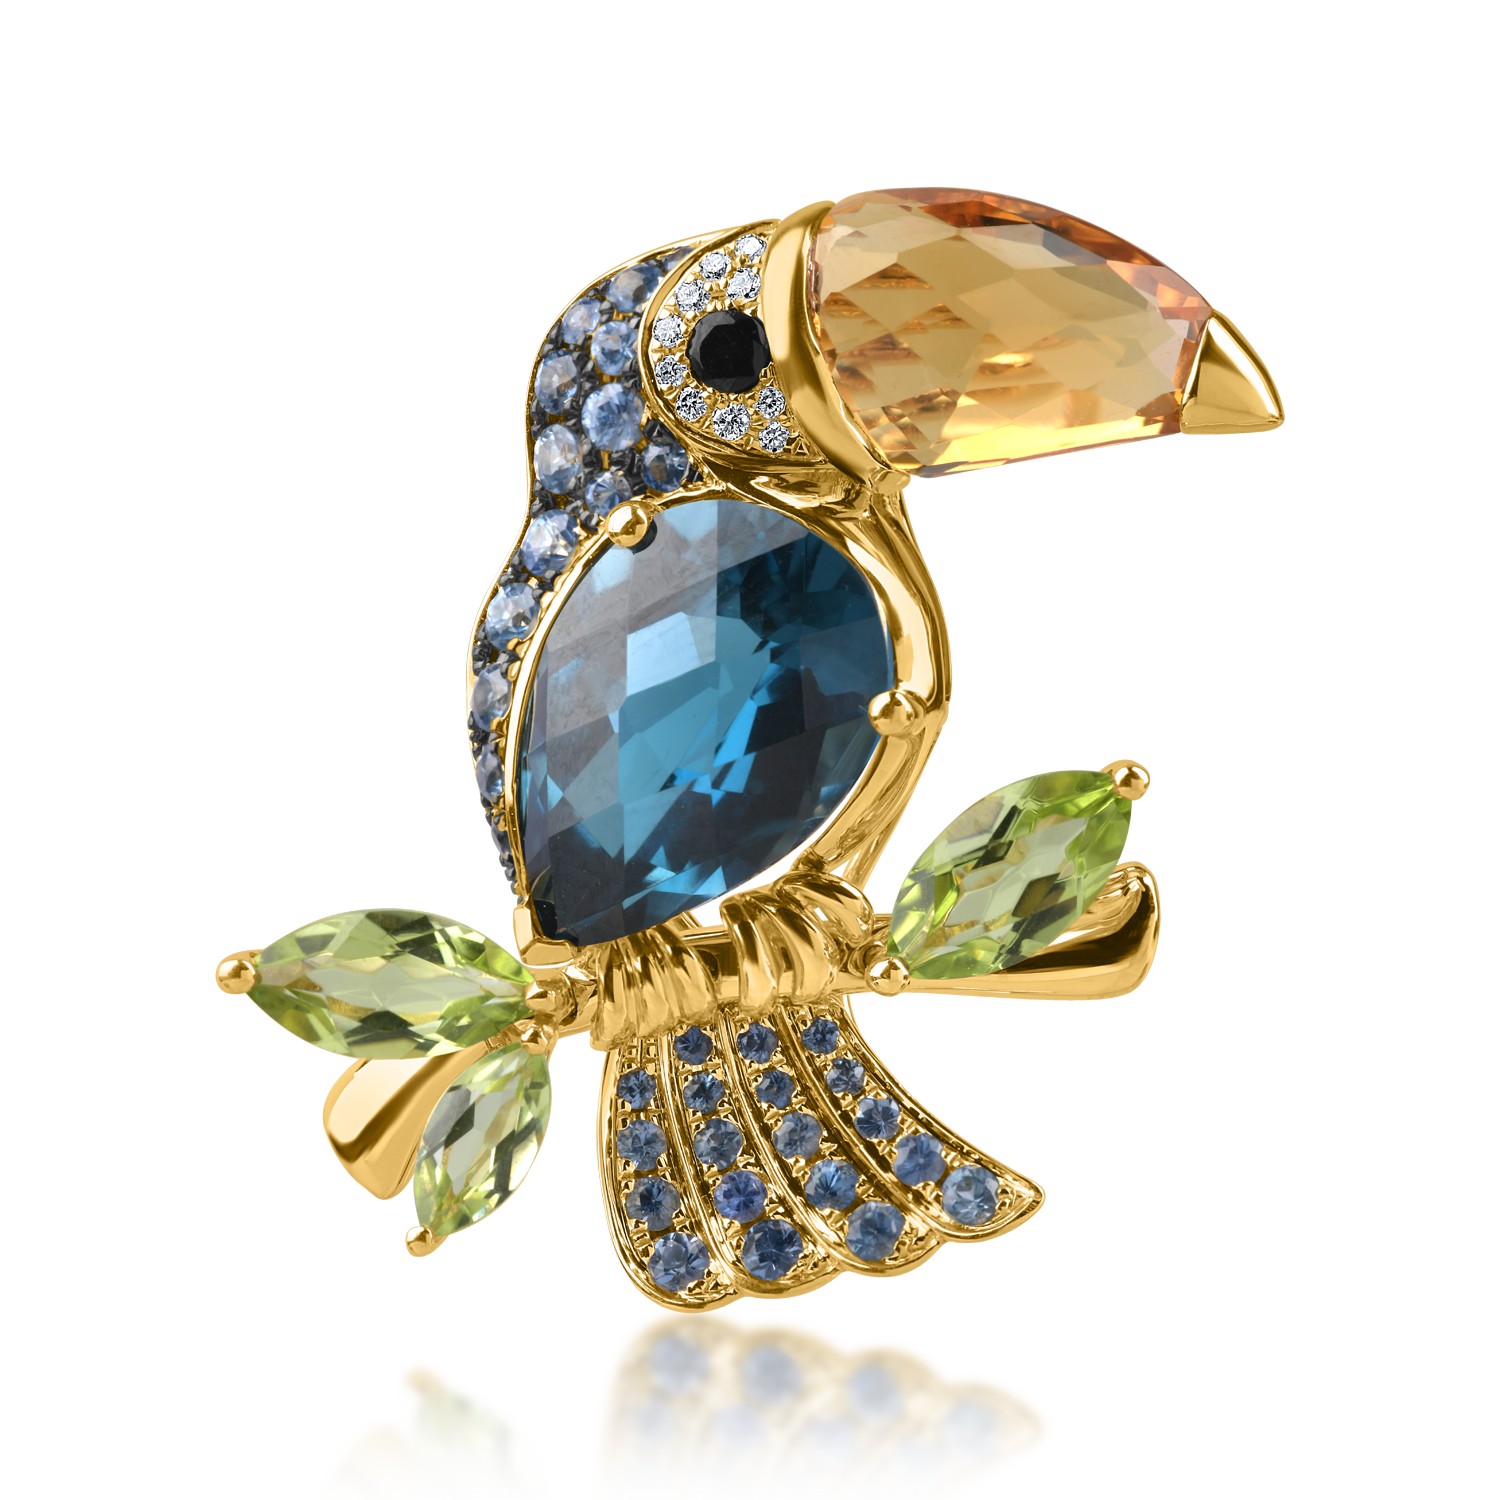 Yellow gold toucan brooch with 10ct semi-precious stones